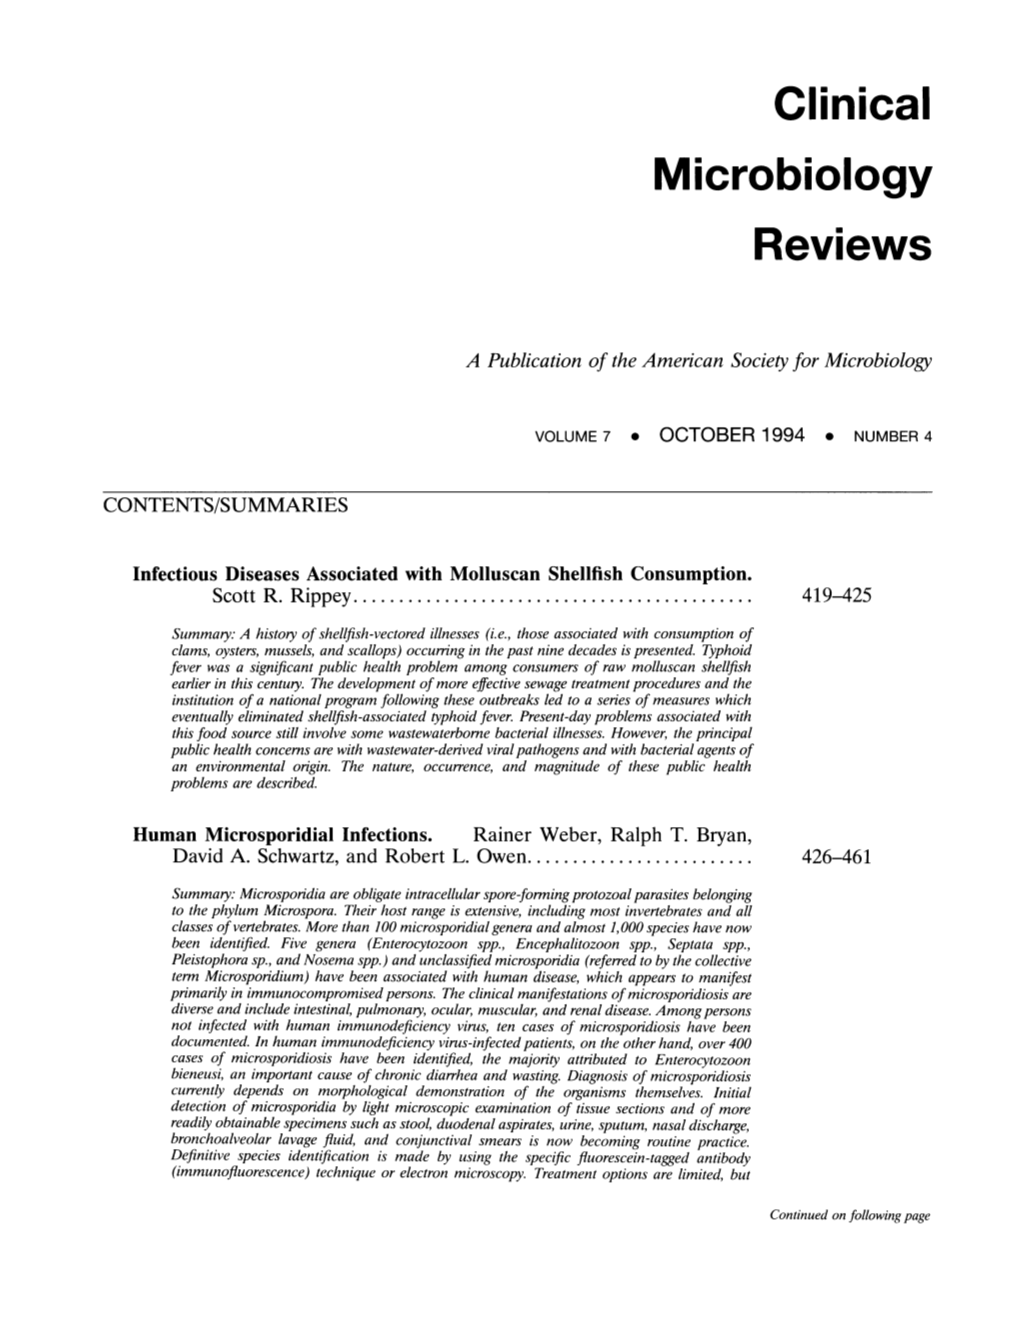 Microbiology Reviews